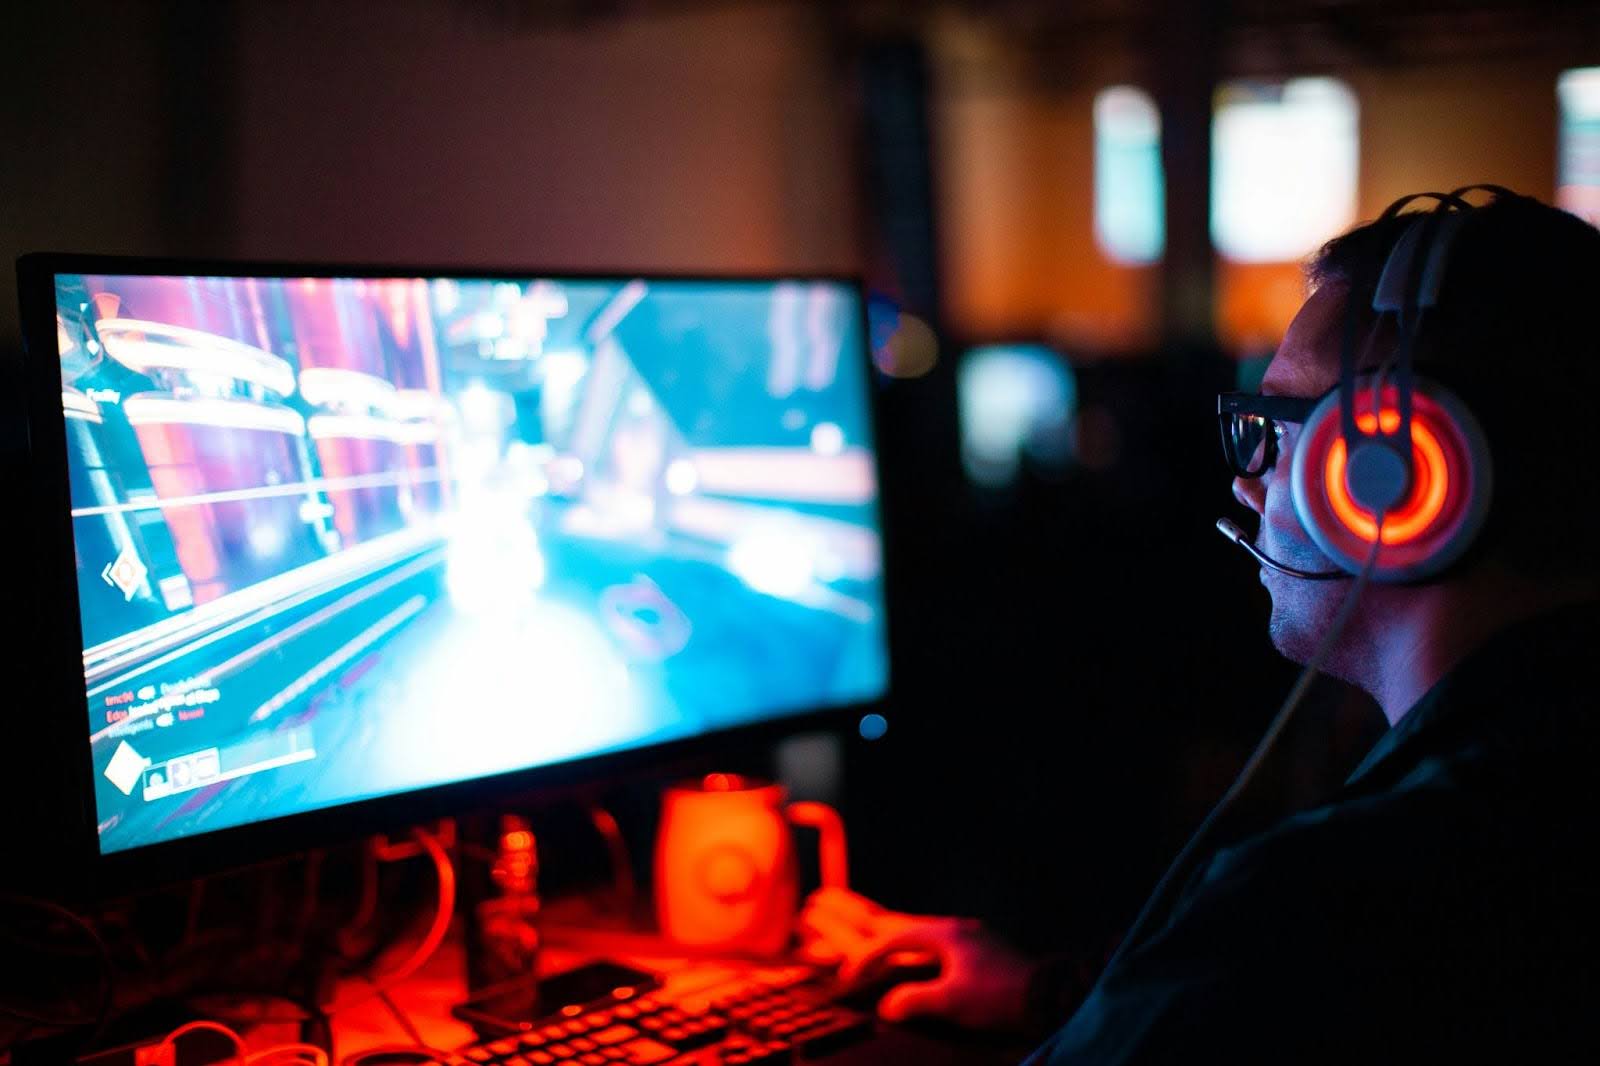 A man engrossed in a video game, displaying signs of gaming addiction with intense focus